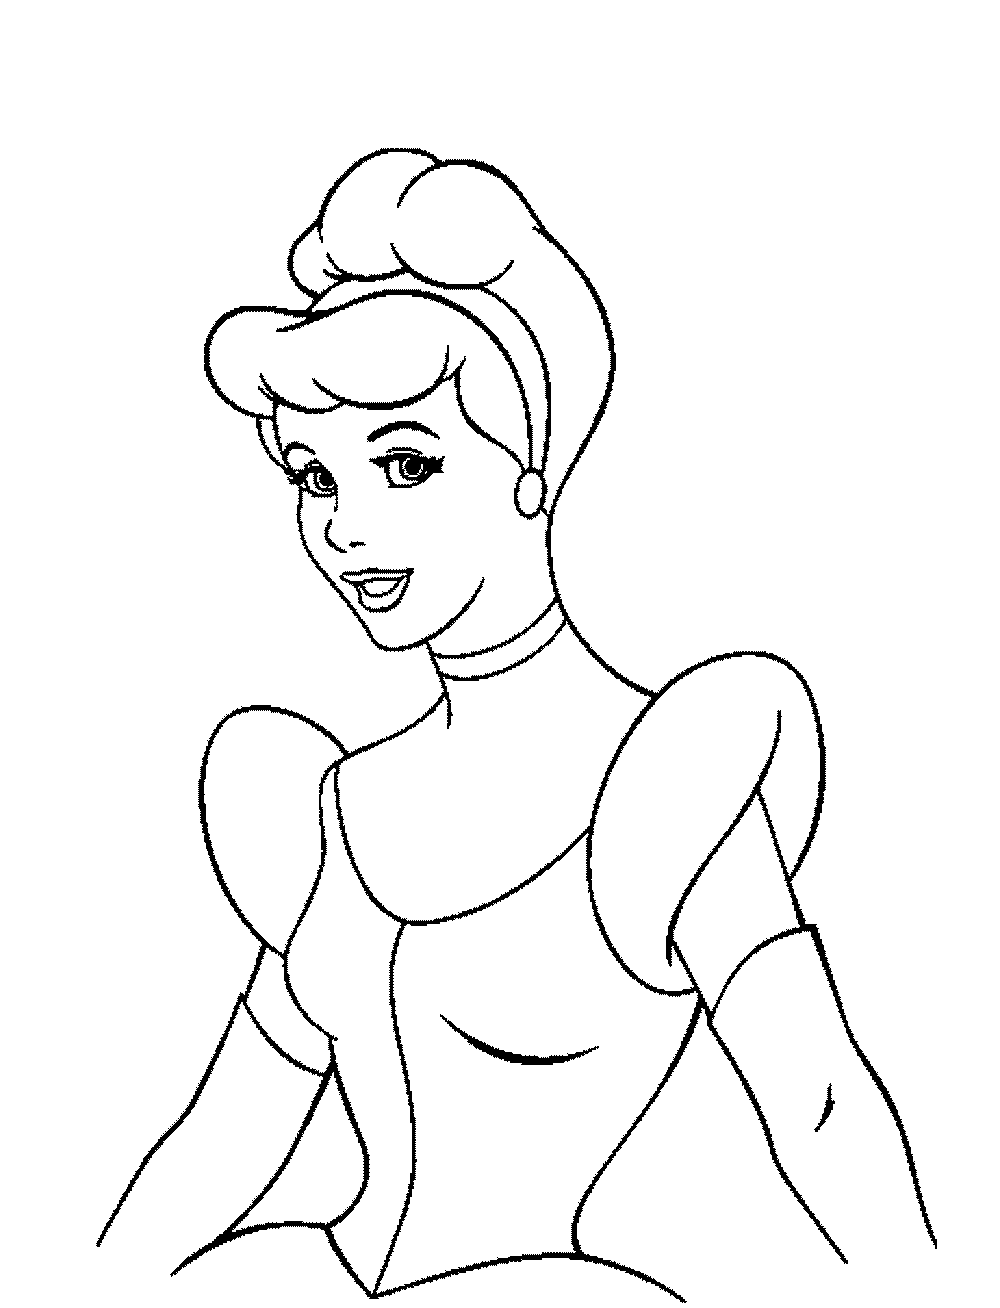 970  Coloring Page Of Cinderella  Latest Free